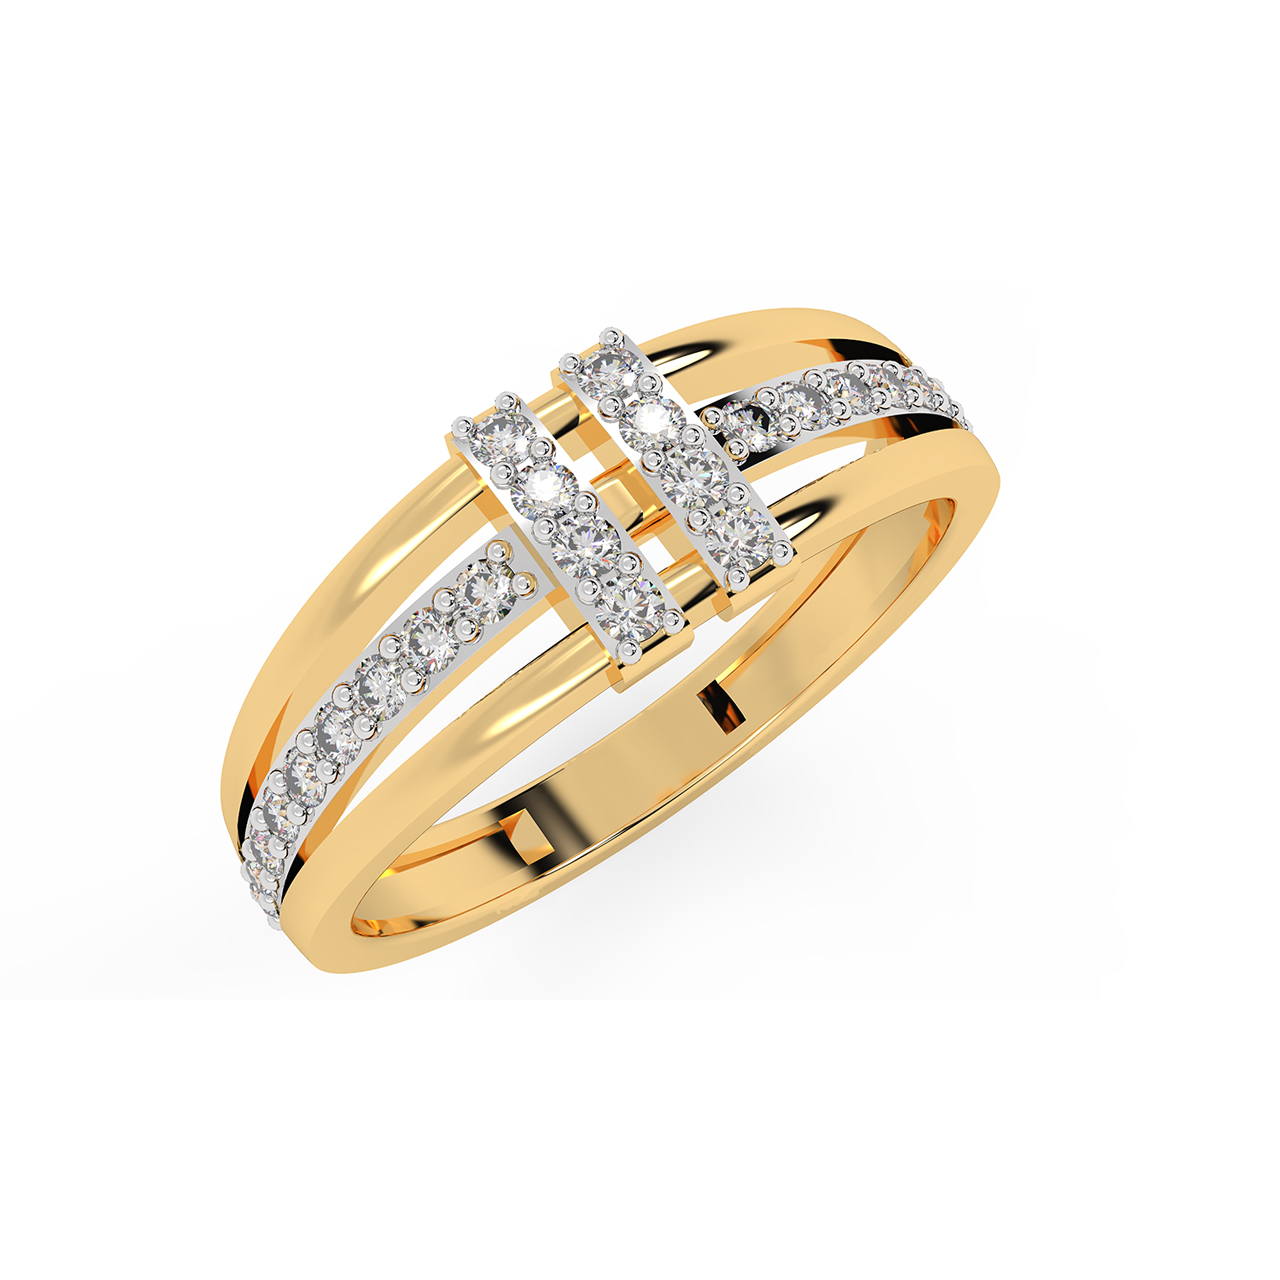 Shop for Unique Diamond Engagement Rings at Our Online Store – Diana  Vincent Jewelry Designs